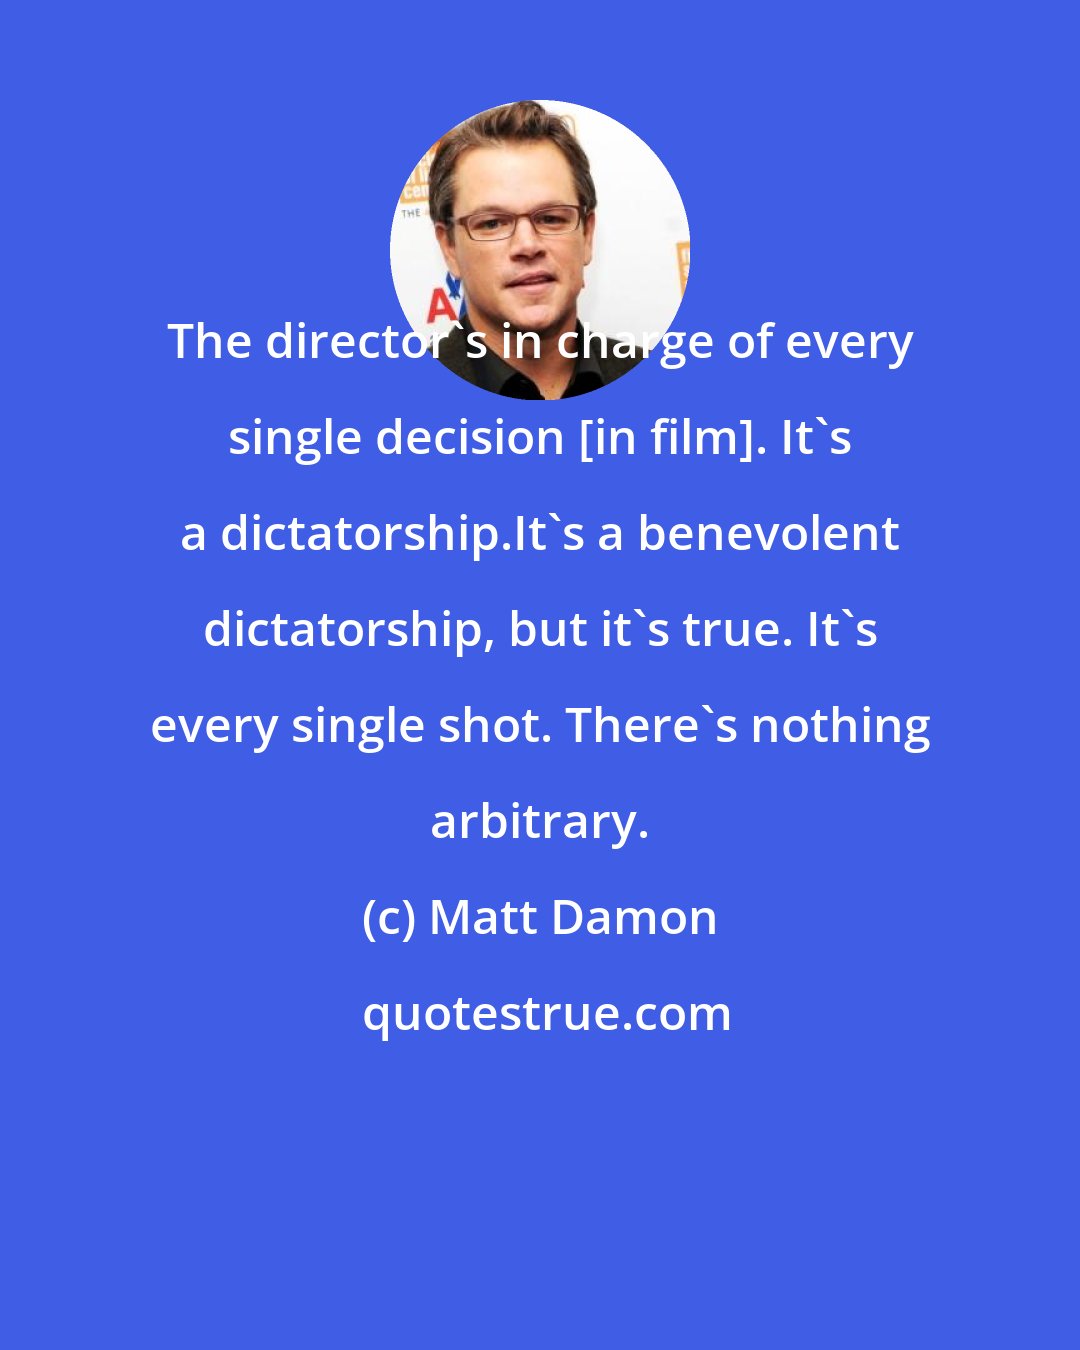 Matt Damon: The director's in charge of every single decision [in film]. It's a dictatorship.It's a benevolent dictatorship, but it's true. It's every single shot. There's nothing arbitrary.